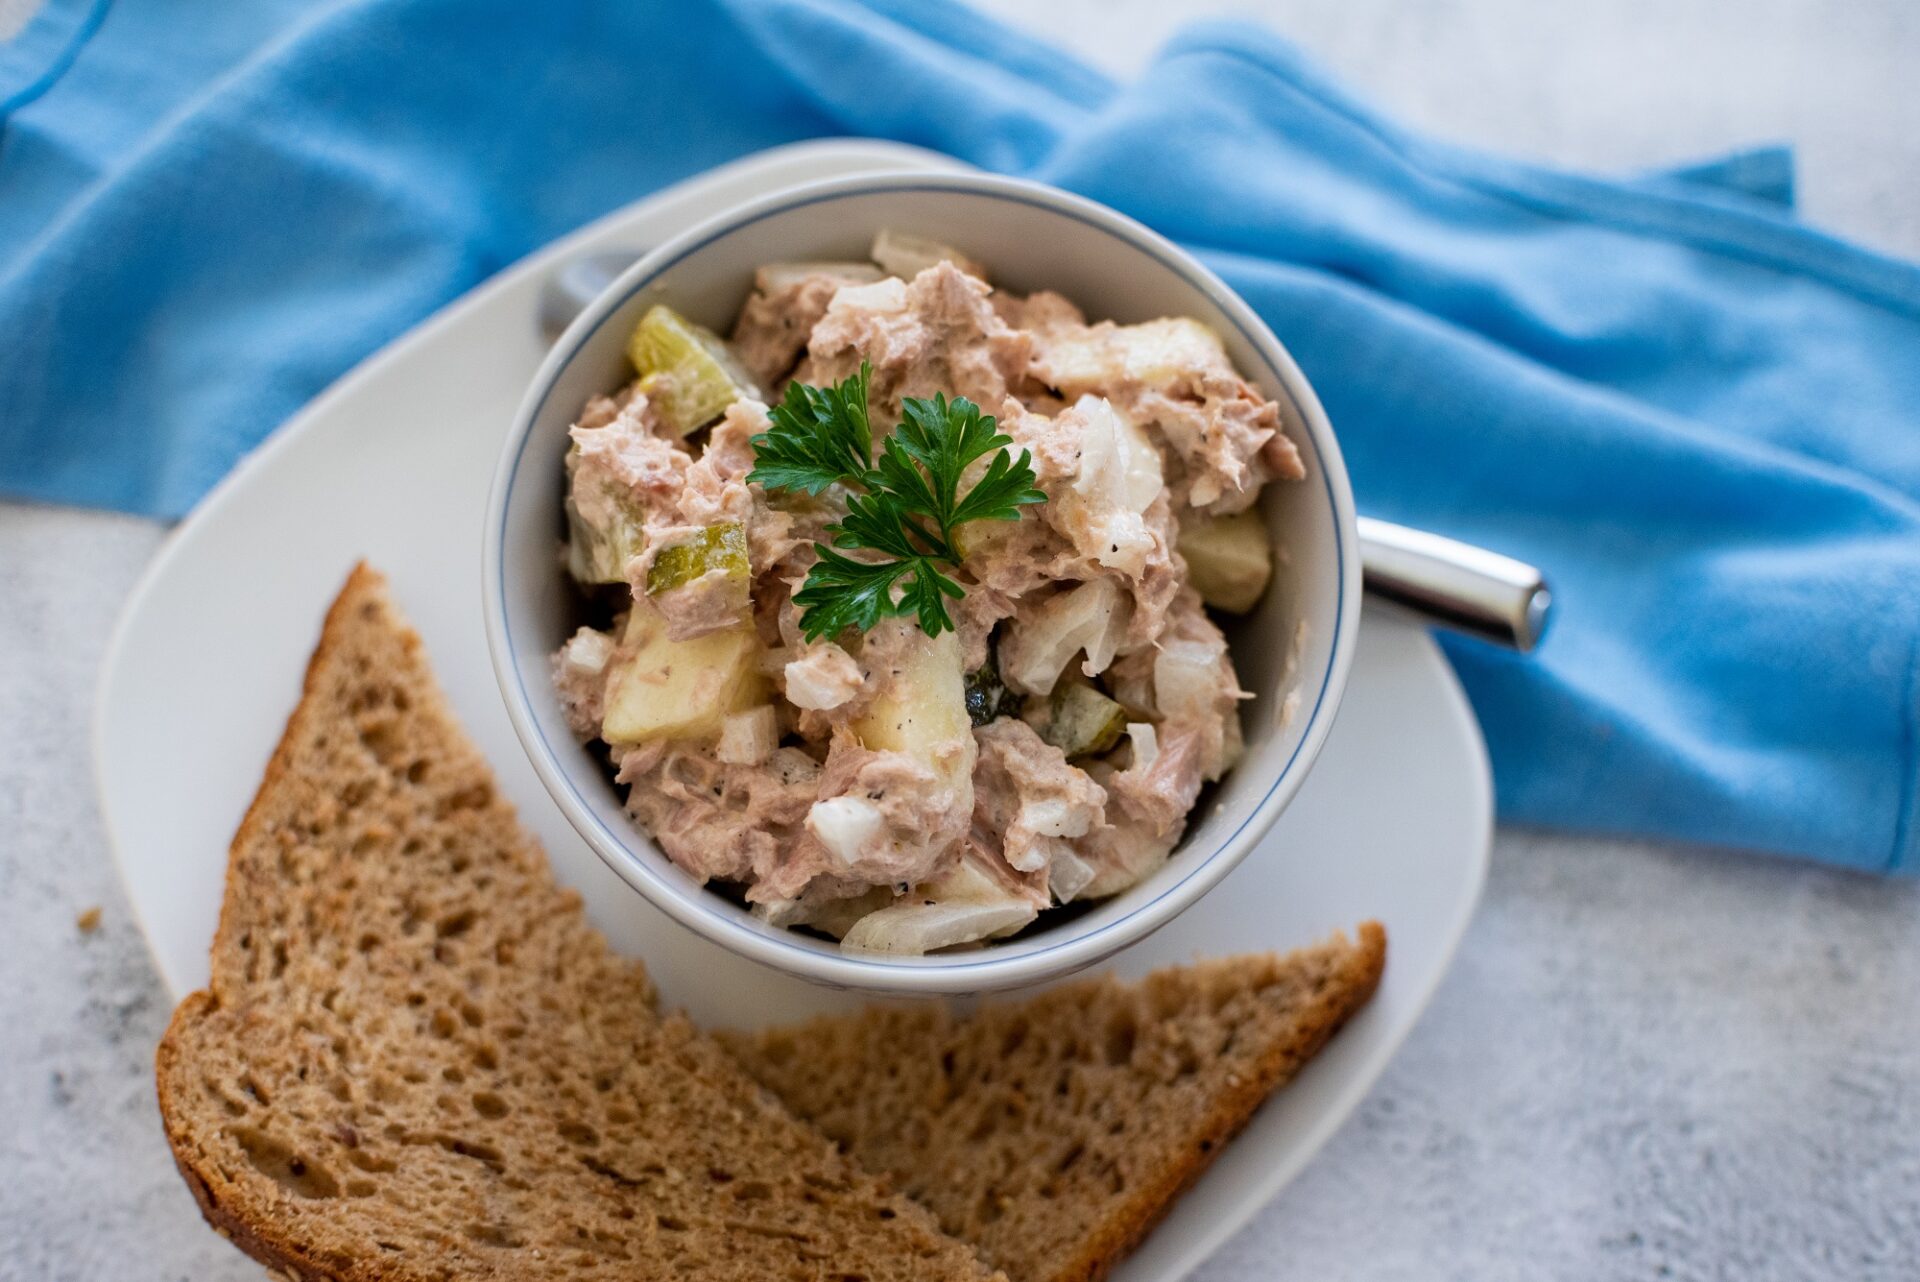 Easy tuna salad in a bowl on a plate with bread.